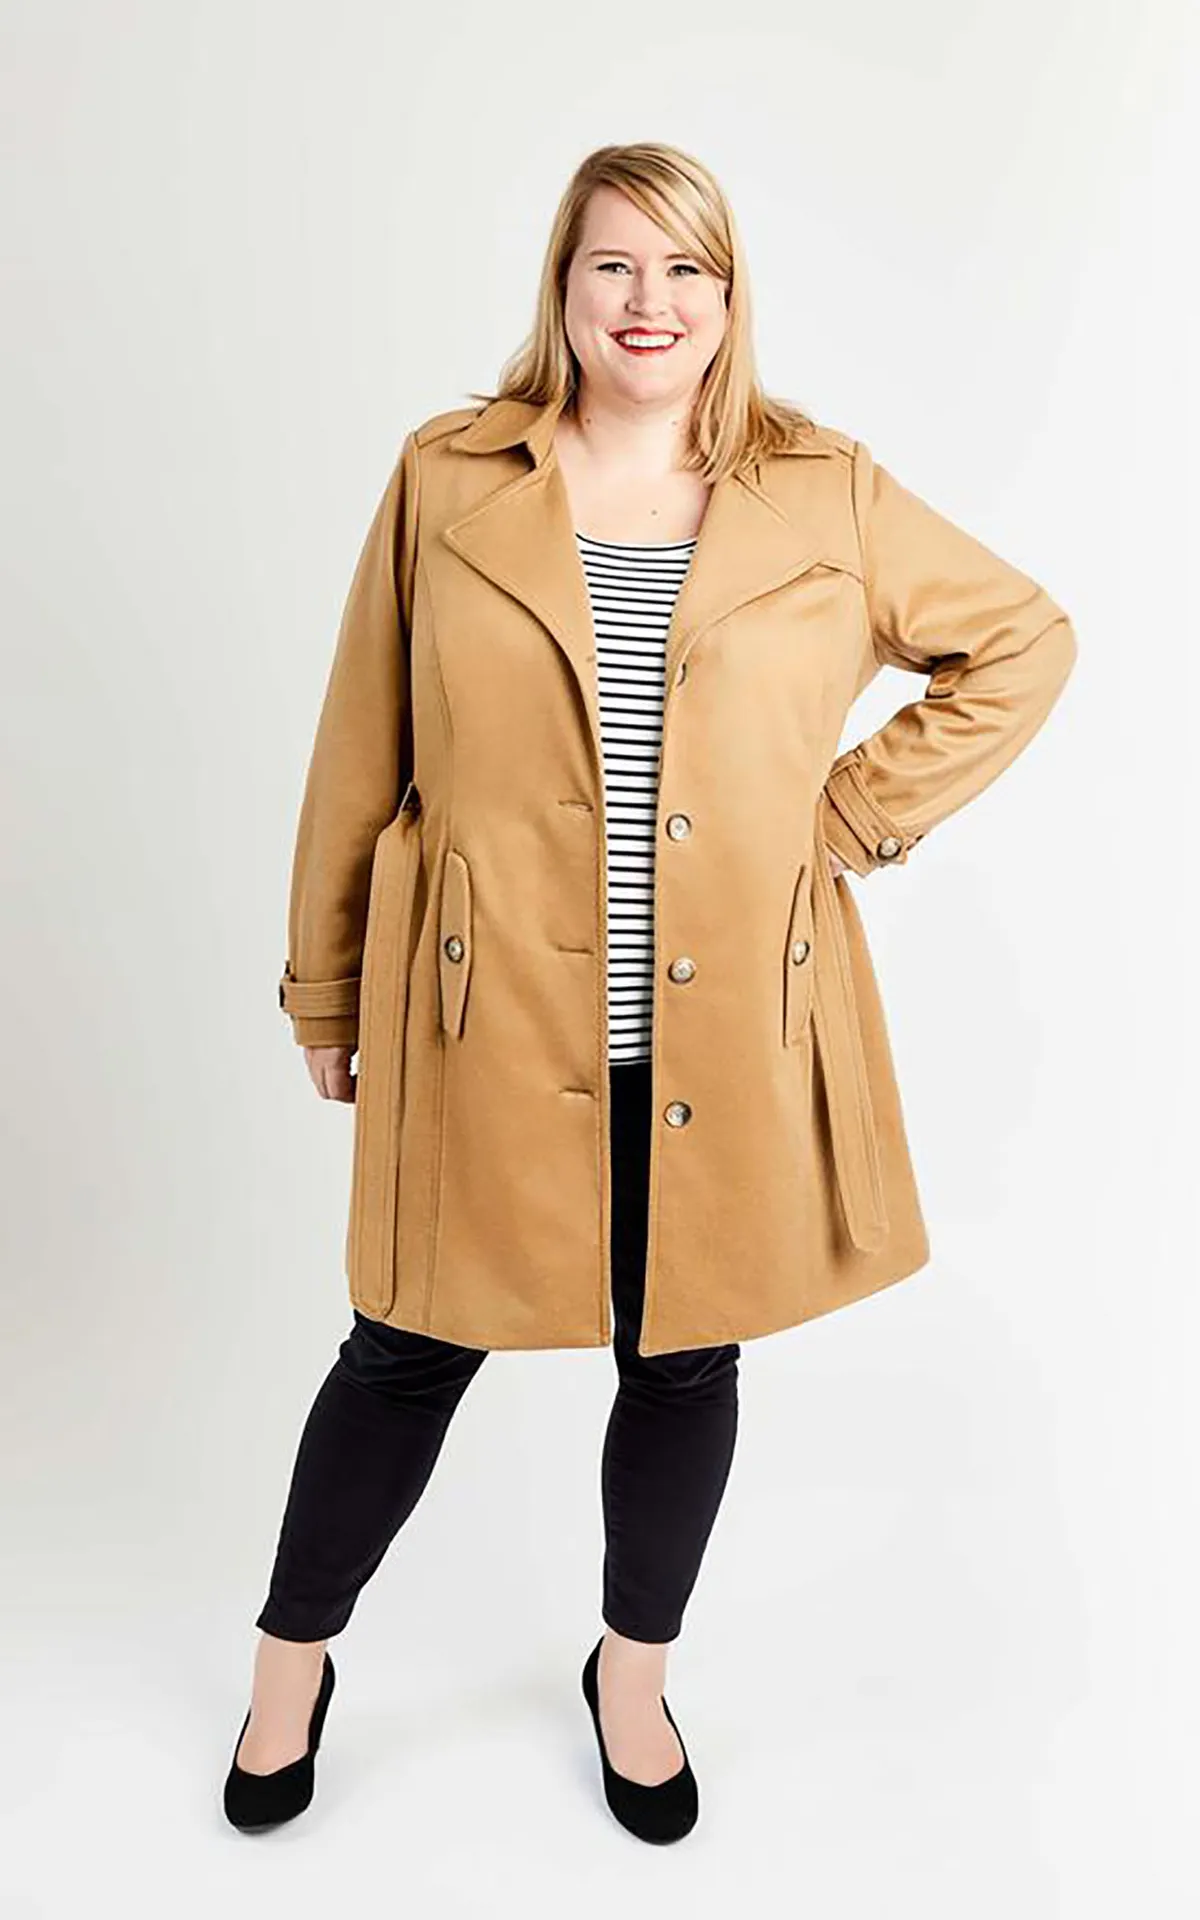 Coat sewing pattern – Chilton trench coat